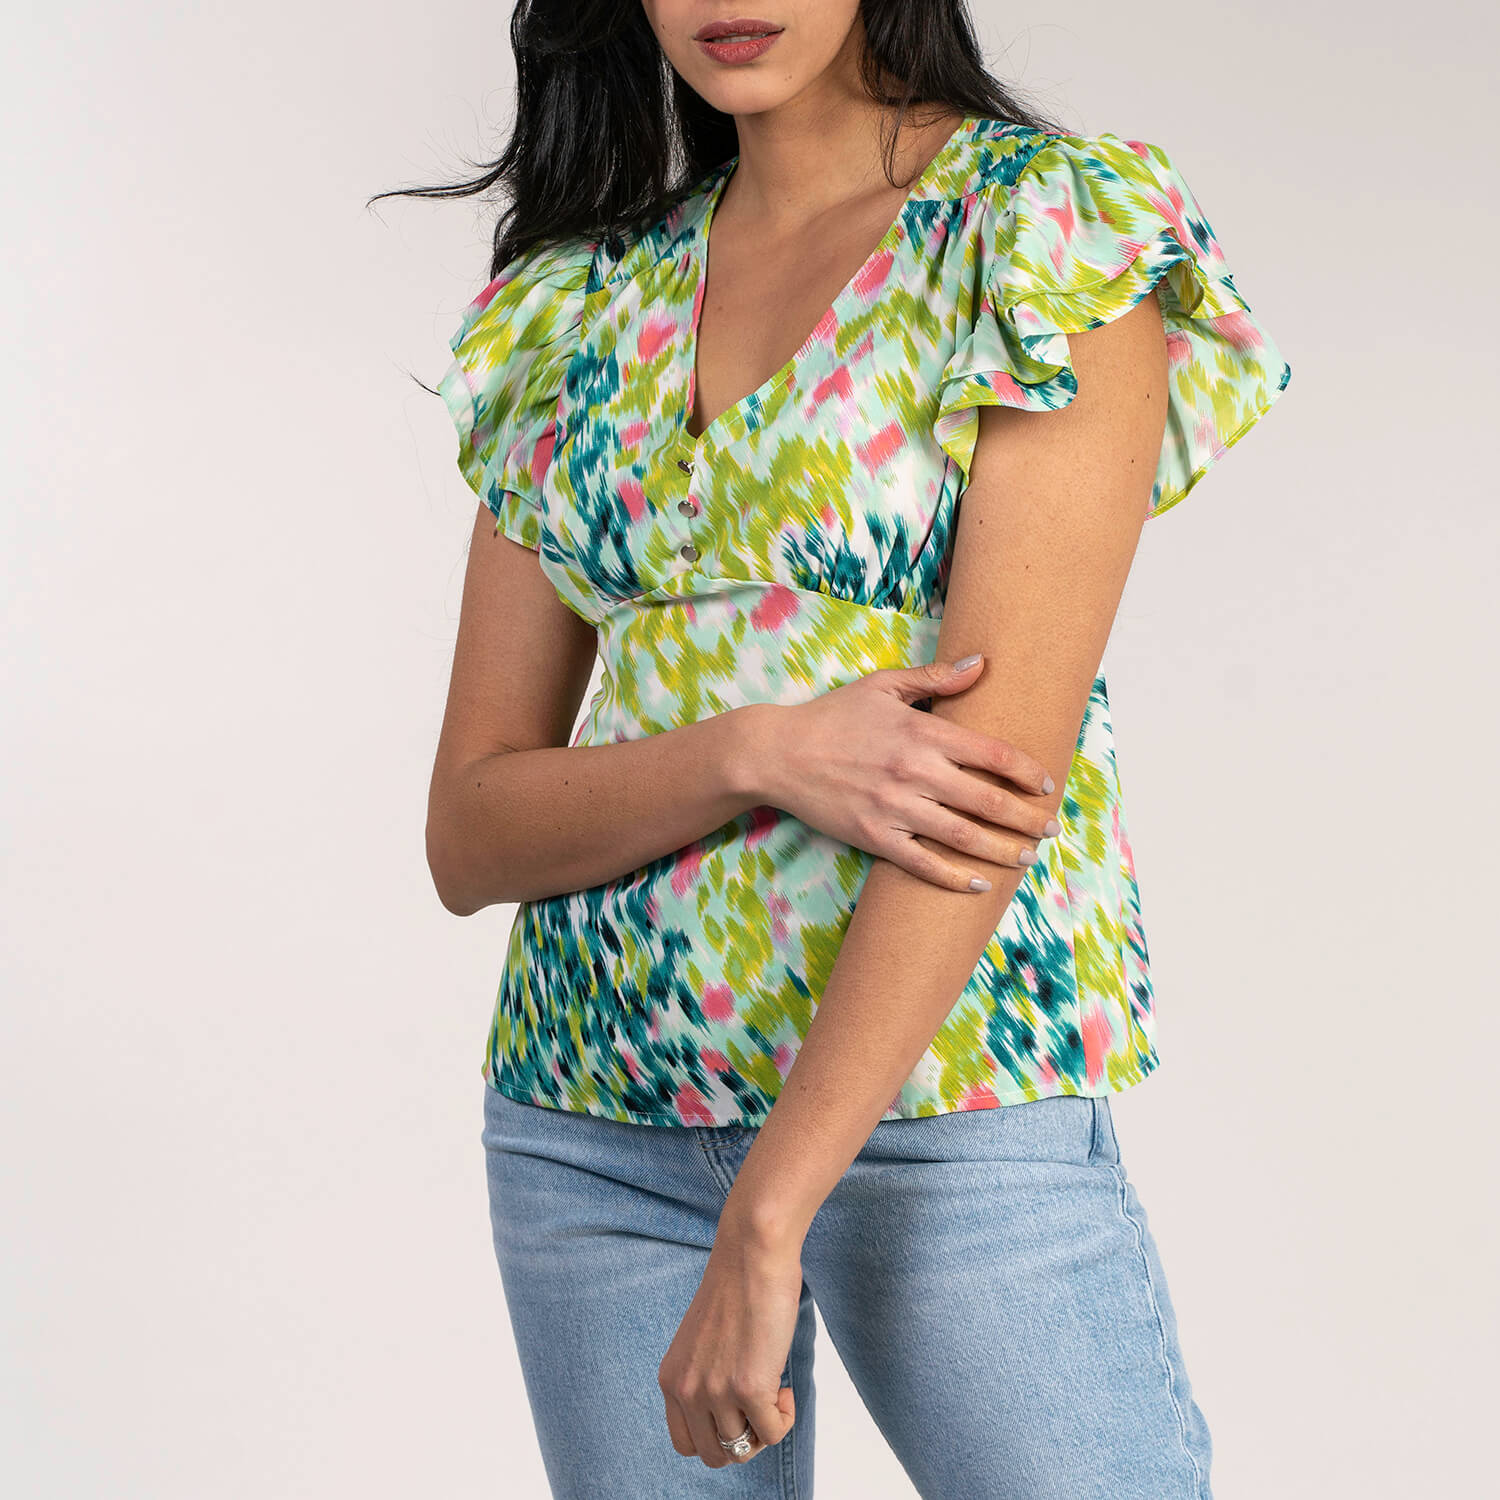 Naoise V Neck Chiffon Top 1 Shaws Department Stores